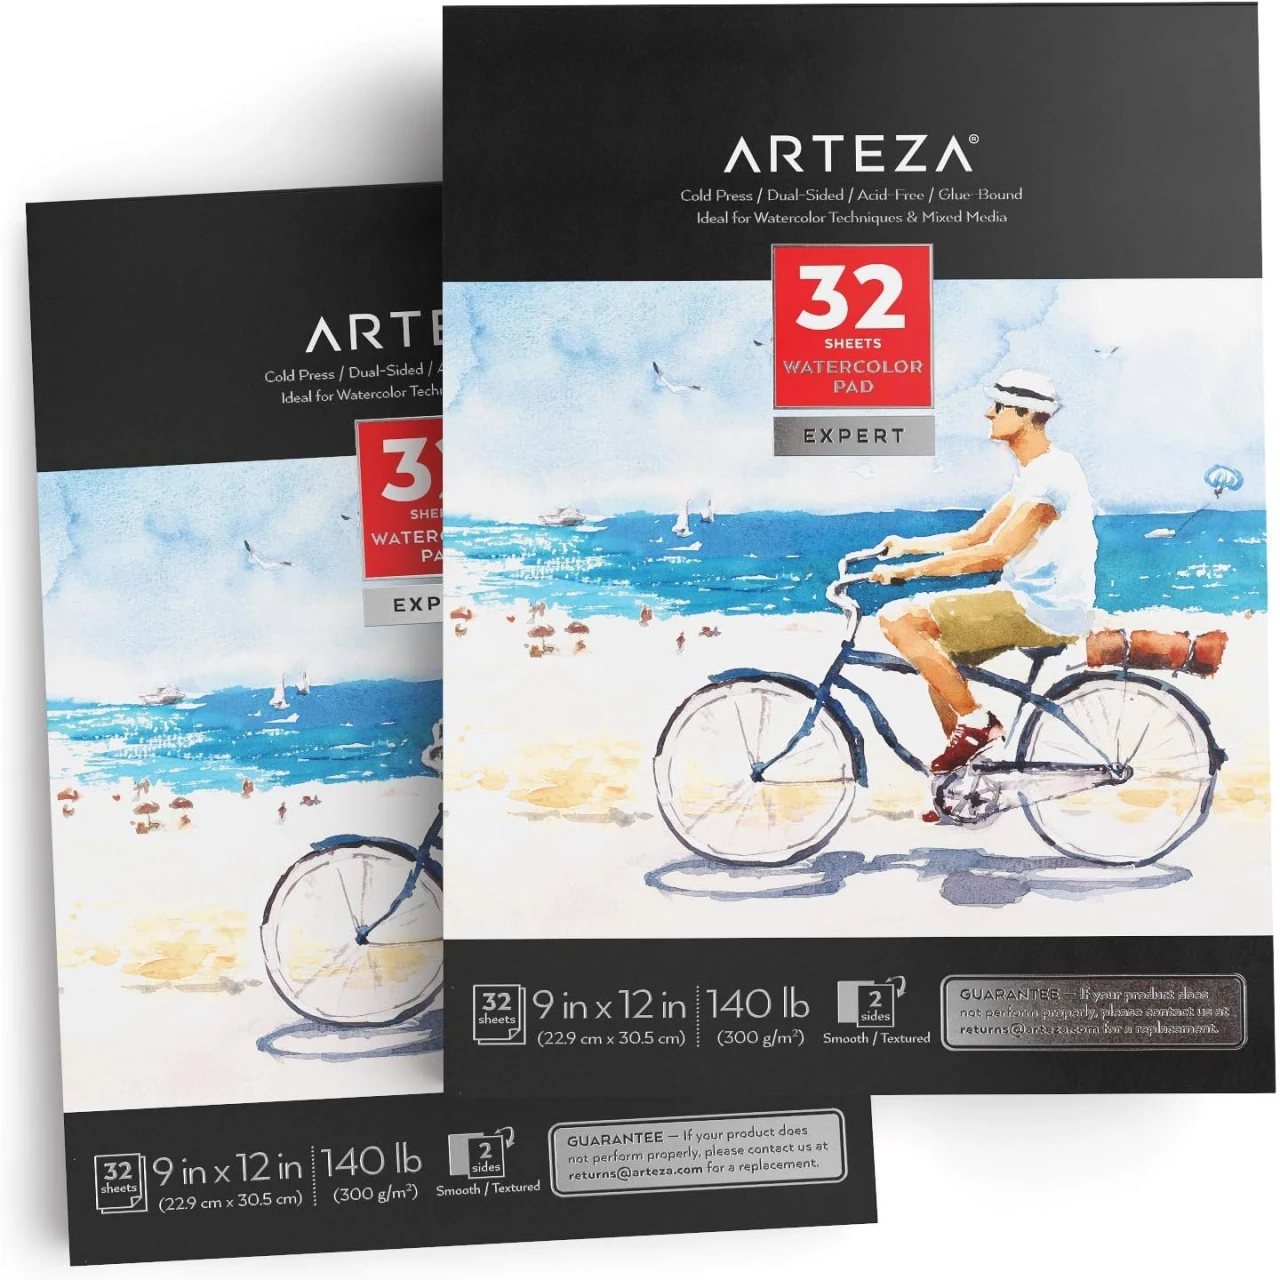 Arteza Watercolor Paper Pad, 9x12 inch, Pack of 2 (32 Sheets Each), Cold Pressed Watercolor Sketchbook, 140lb/300gsm Acid Free Watercolor Paper, Art Supplies for Watercolors &amp; Mixed Media Drawing